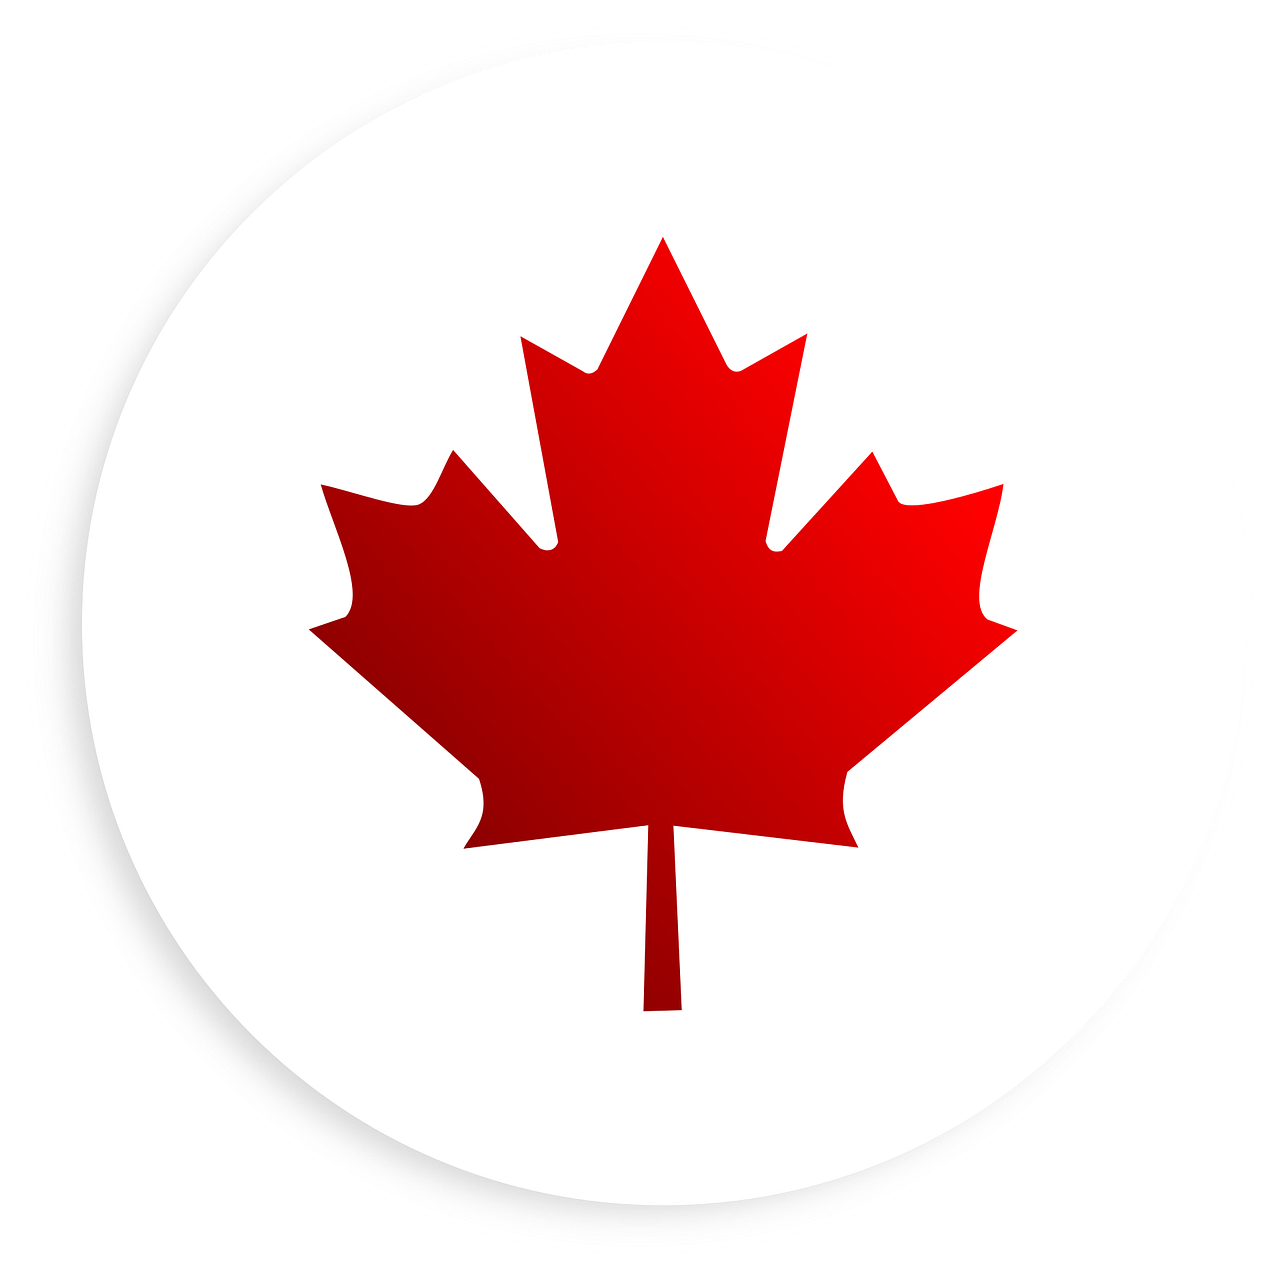 Image of a red maple leaf icon on a white background.